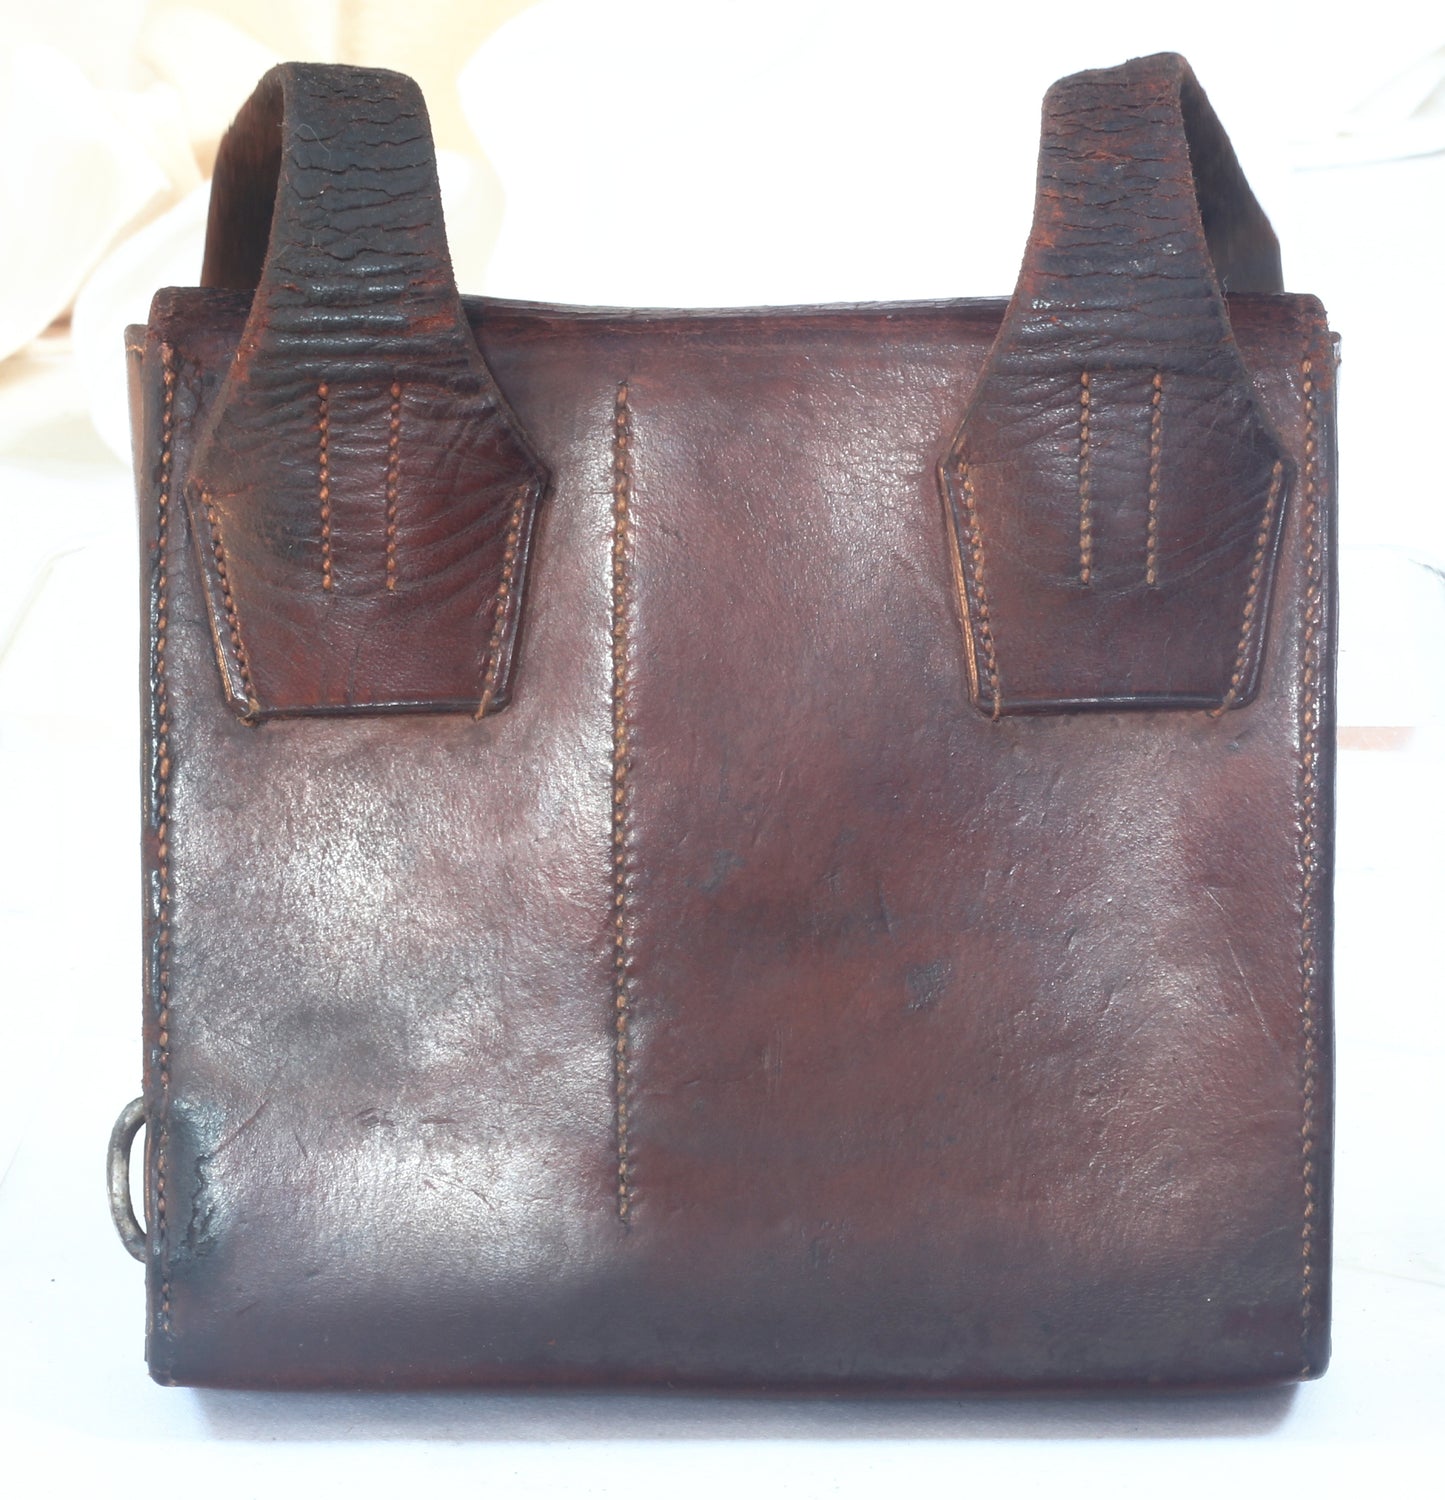 Vintage Leather Canteen Case